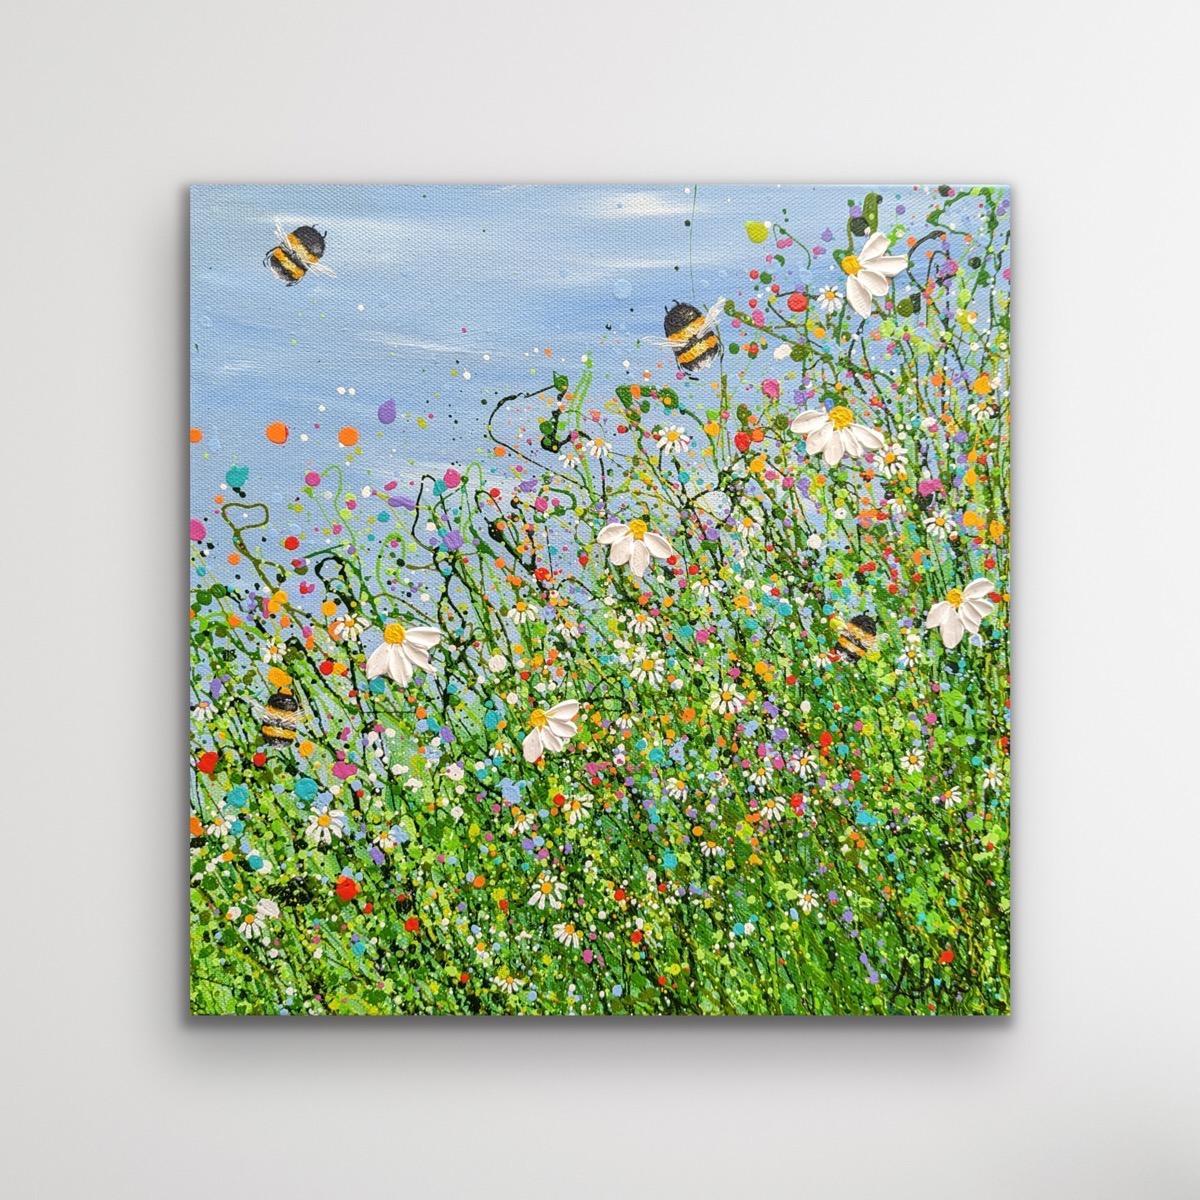 Bumbling Meadows 2 - Using a little texture I have created this happy flourish with little bees going about there day. I love to splash around with colour creating wild abstract fields of flowers. 30 x 30 cm 1.5cm thickness Acrylic on canvas I love